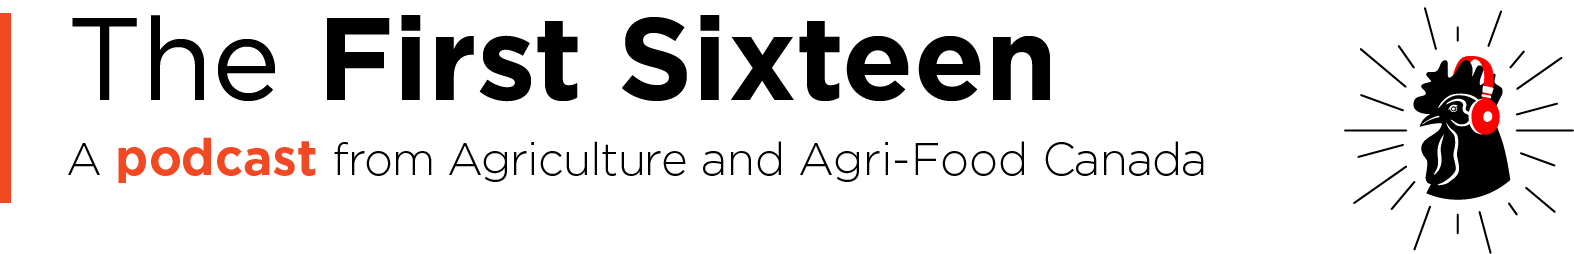 The First Sixteen - A podcast from Agriculture and Agri-Food Canada